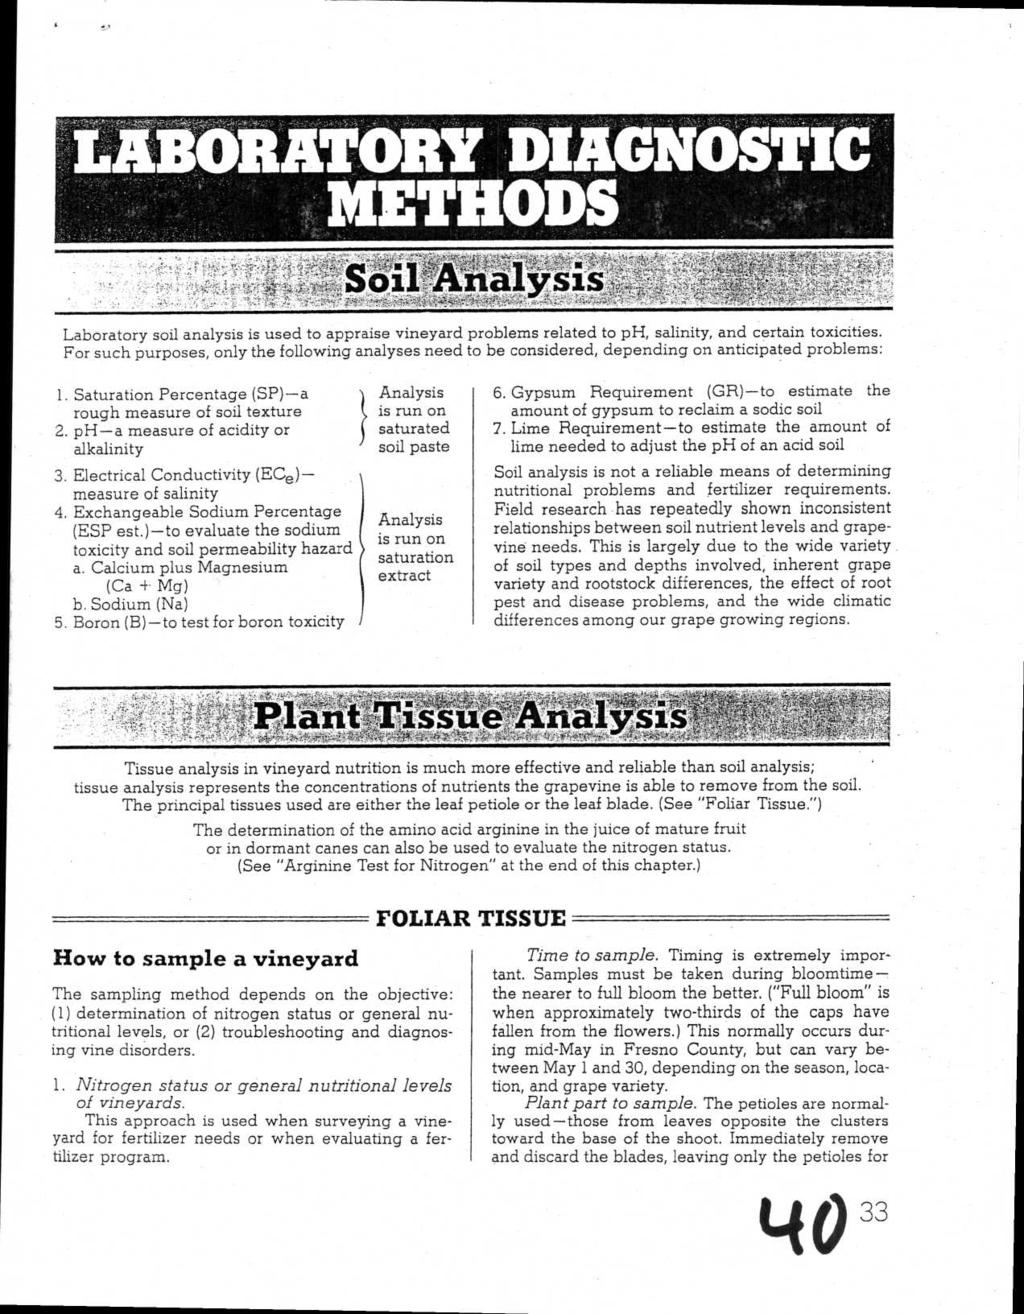 RY DLAGNOSTIC METHODS. Laboratory soil analysis is used to appraise vineyard problems related to ph, salinity, and certain toxicities.